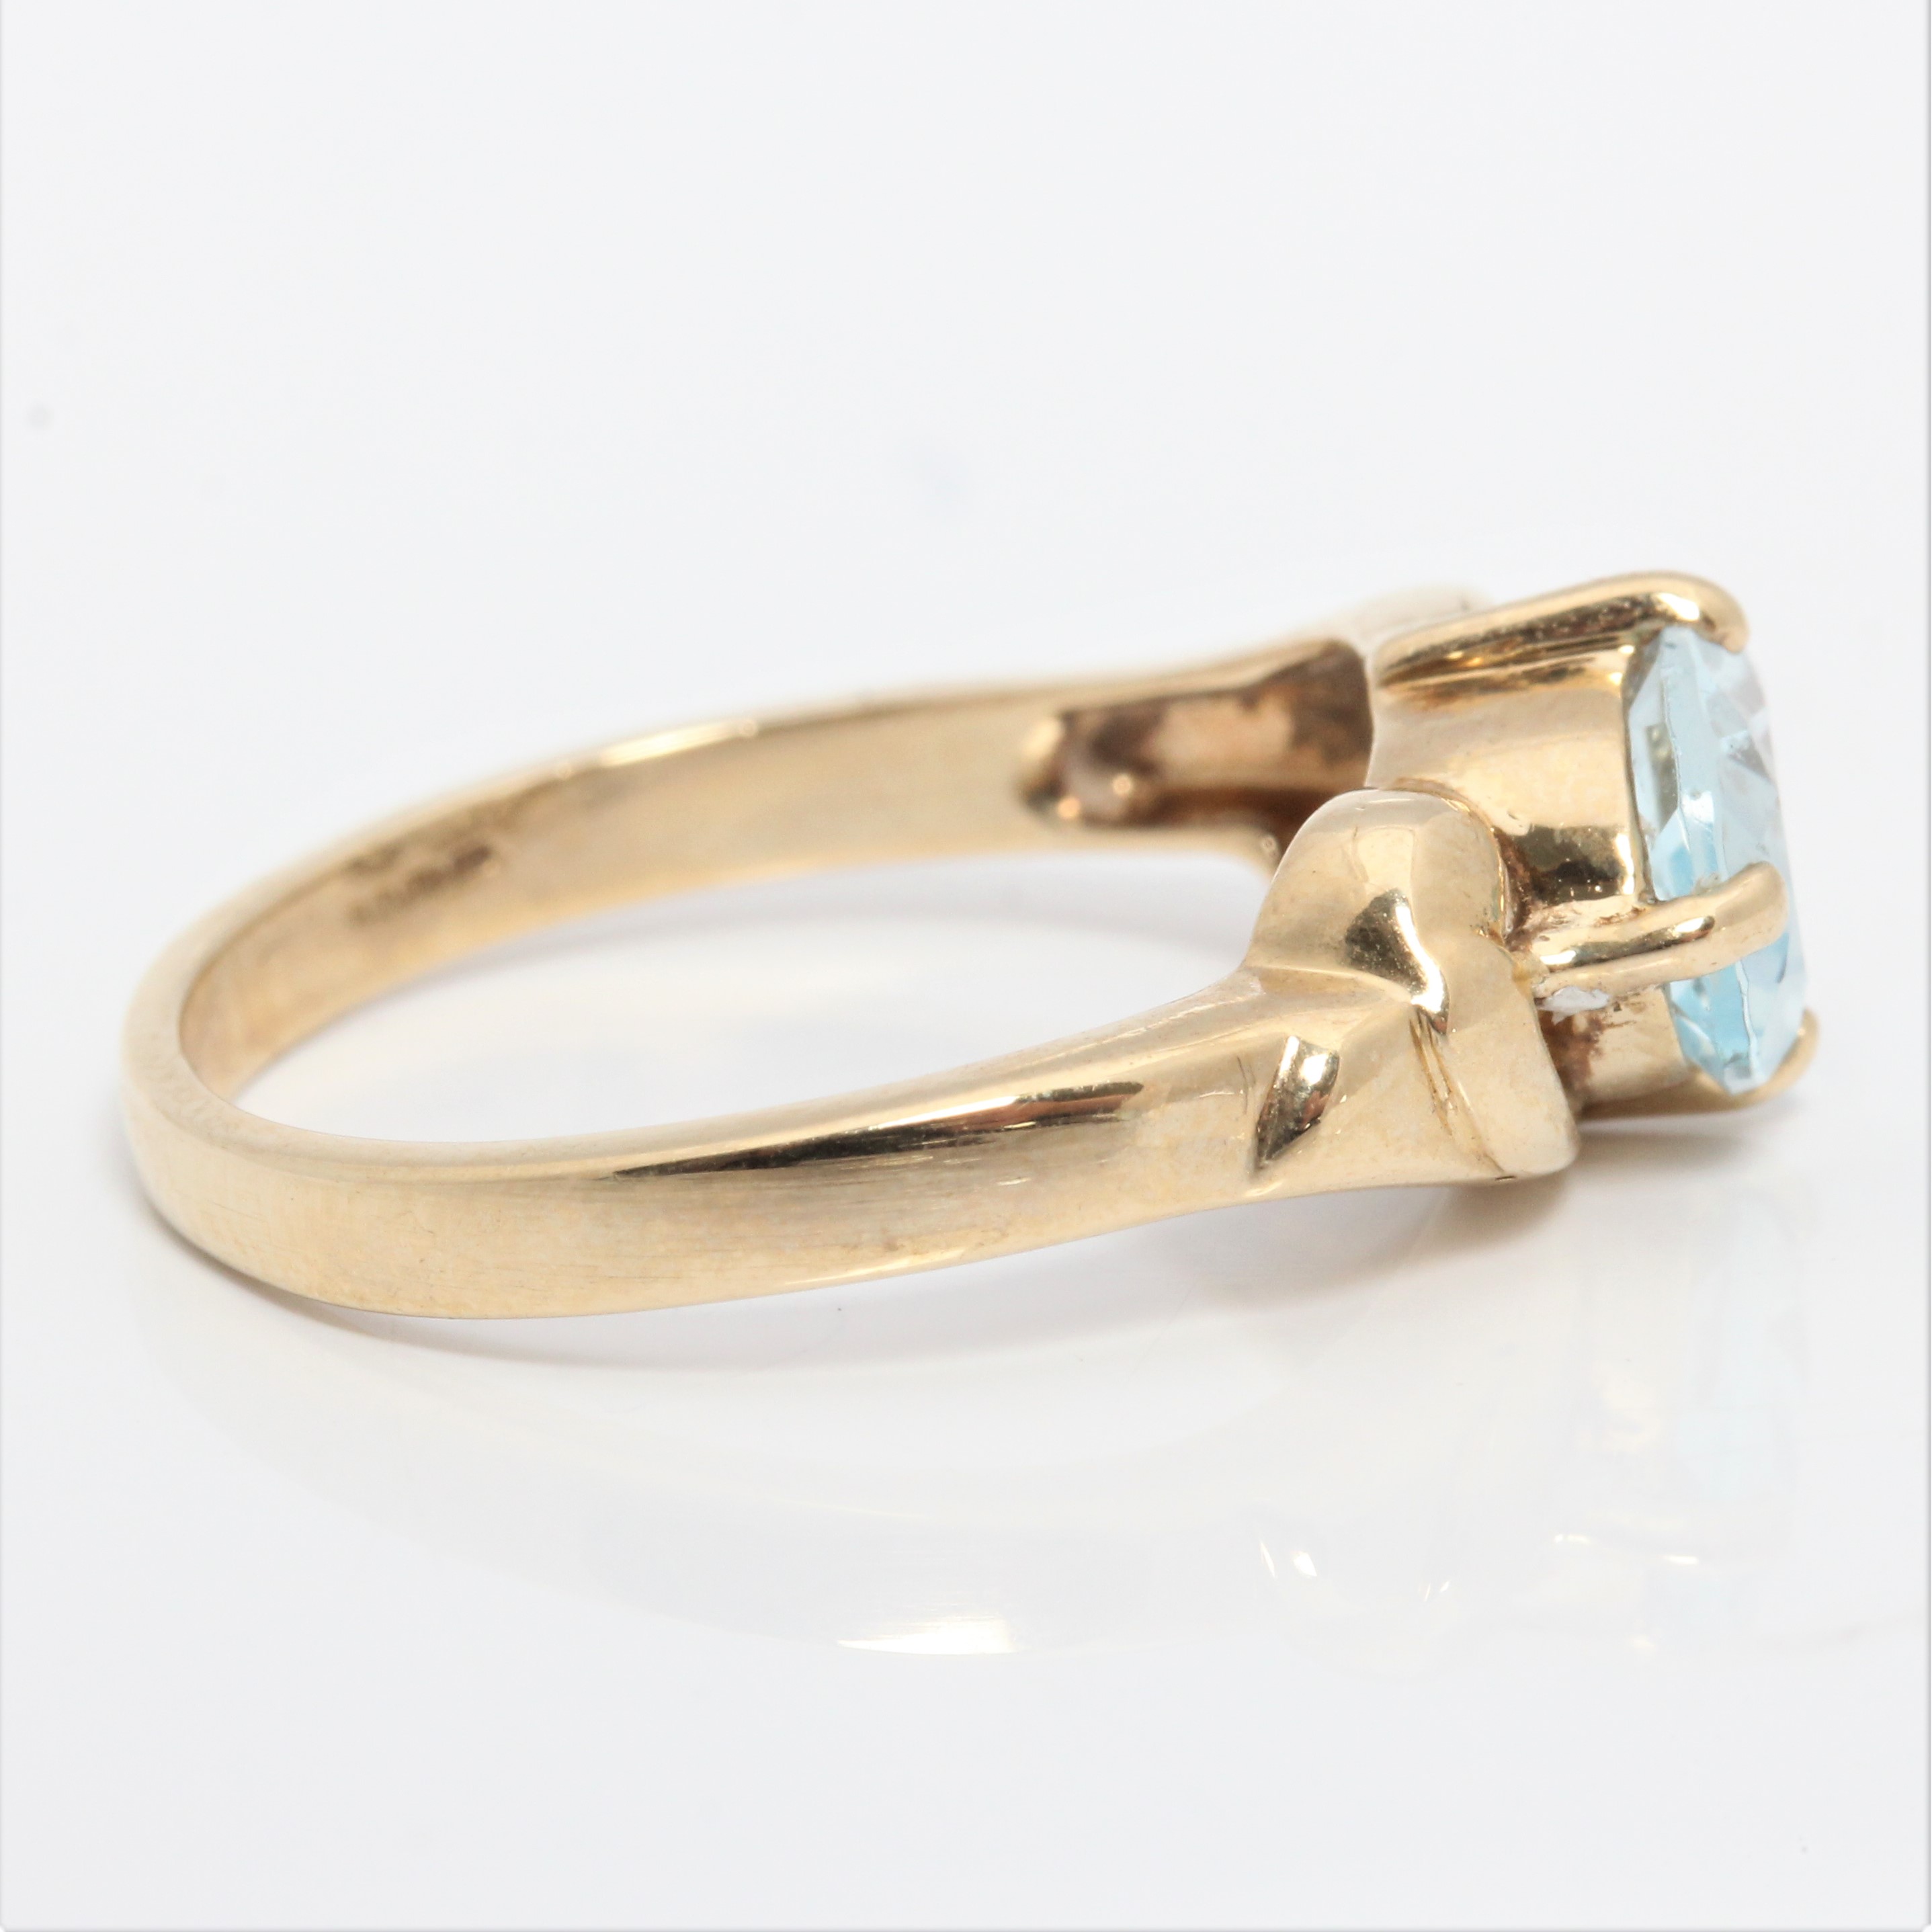 A hallmarked 9ct yellow gold blue topaz dress ring, ring size N 1/2 - Image 2 of 4